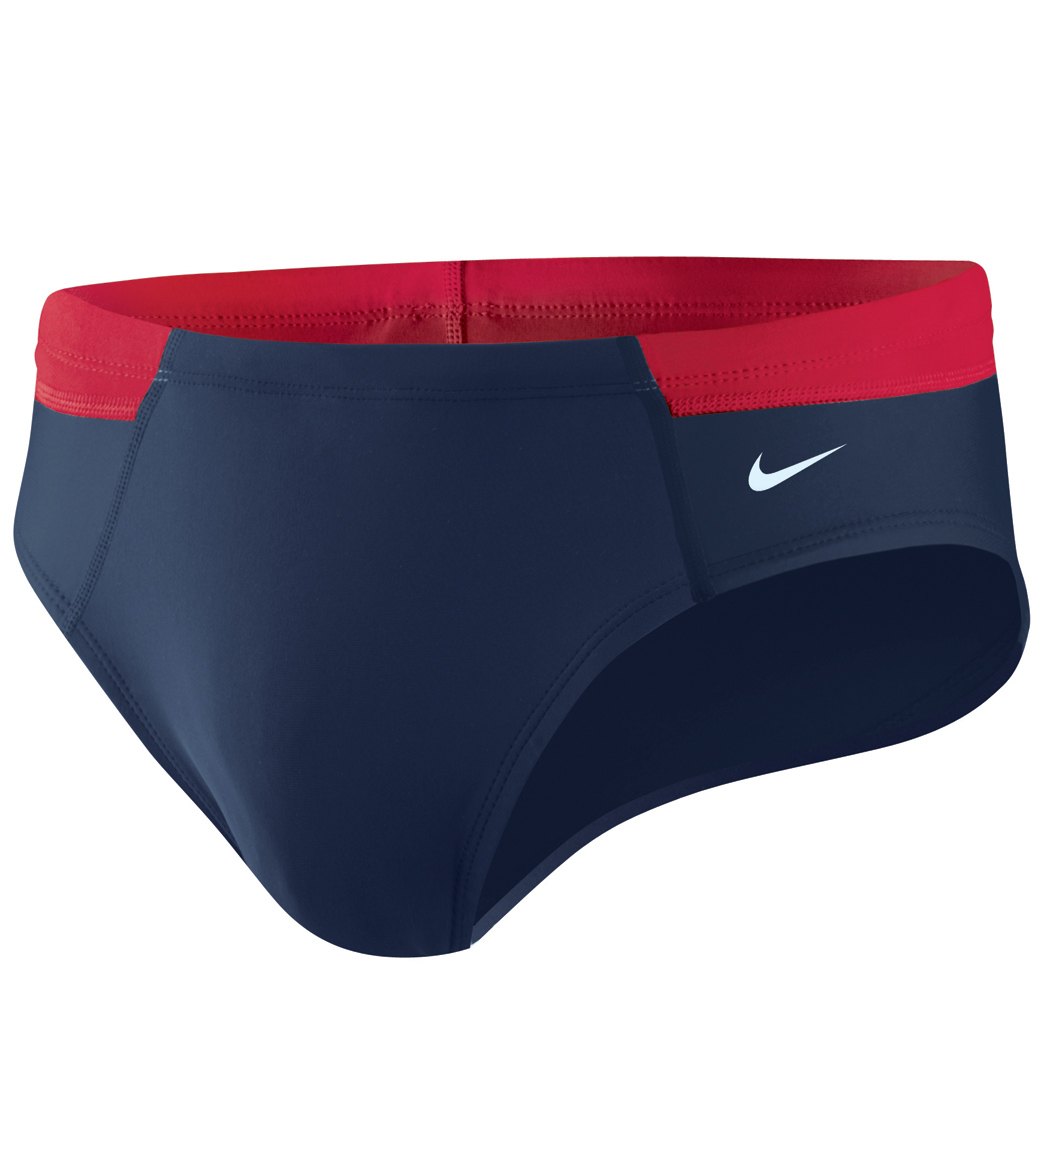 Nike Victory Color Block Brief Swimsuit at SwimOutlet.com